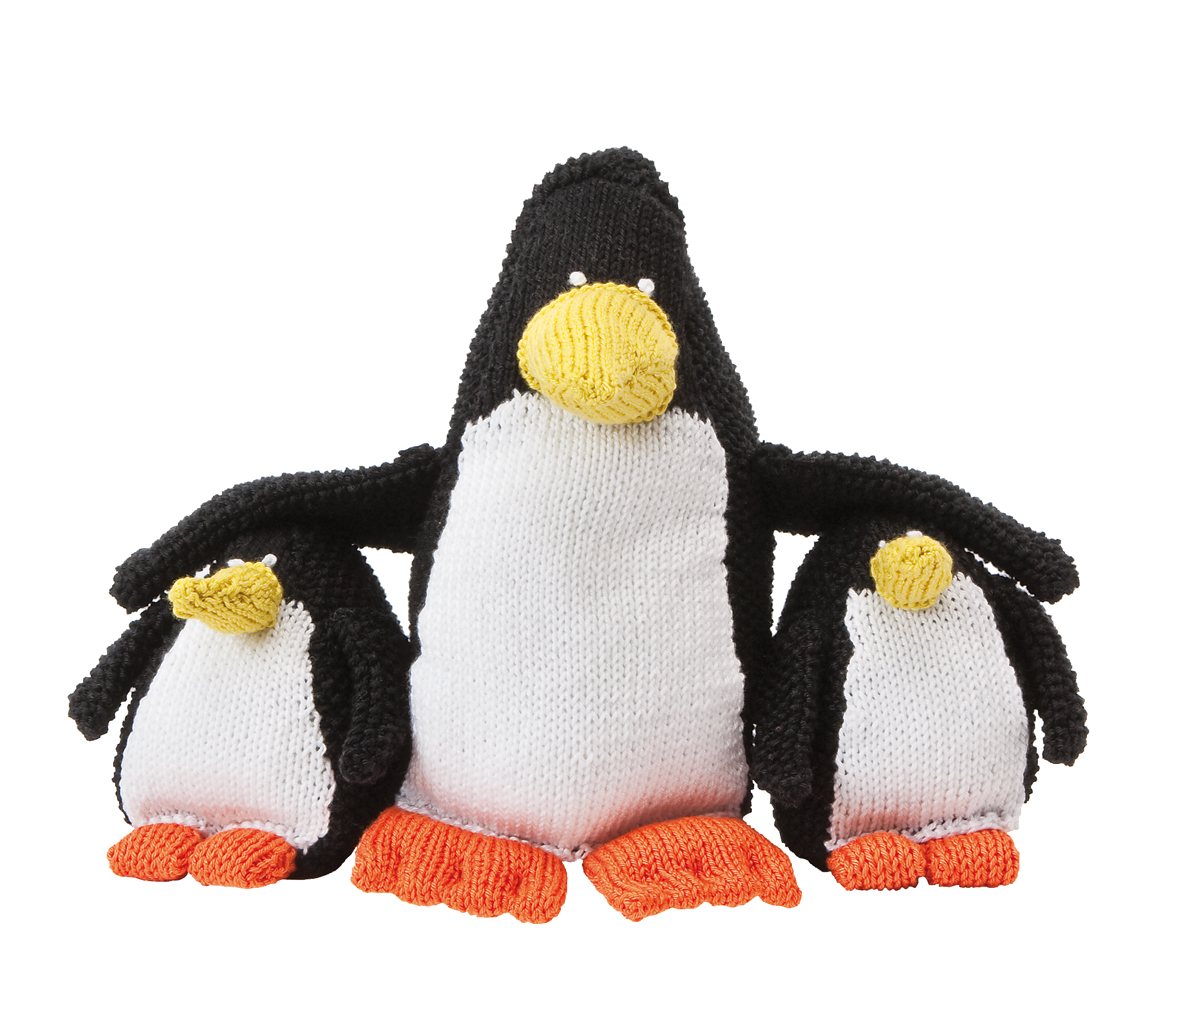 12 Days of Penguin... On the twelfth day of Penguin